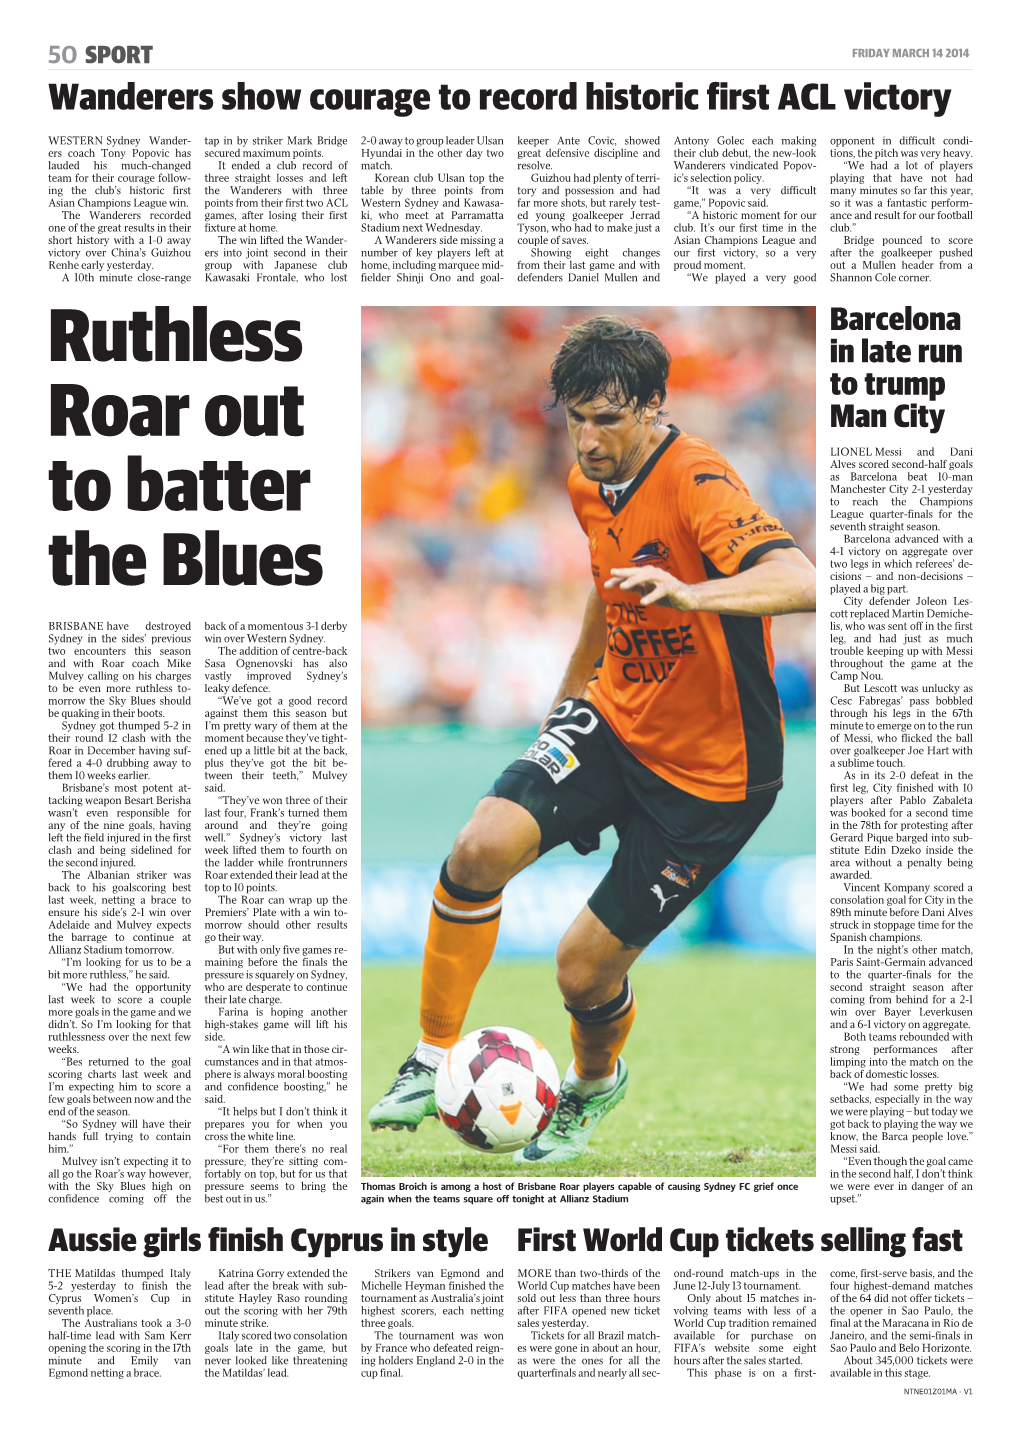 Ruthless Roar out to Batter the Blues